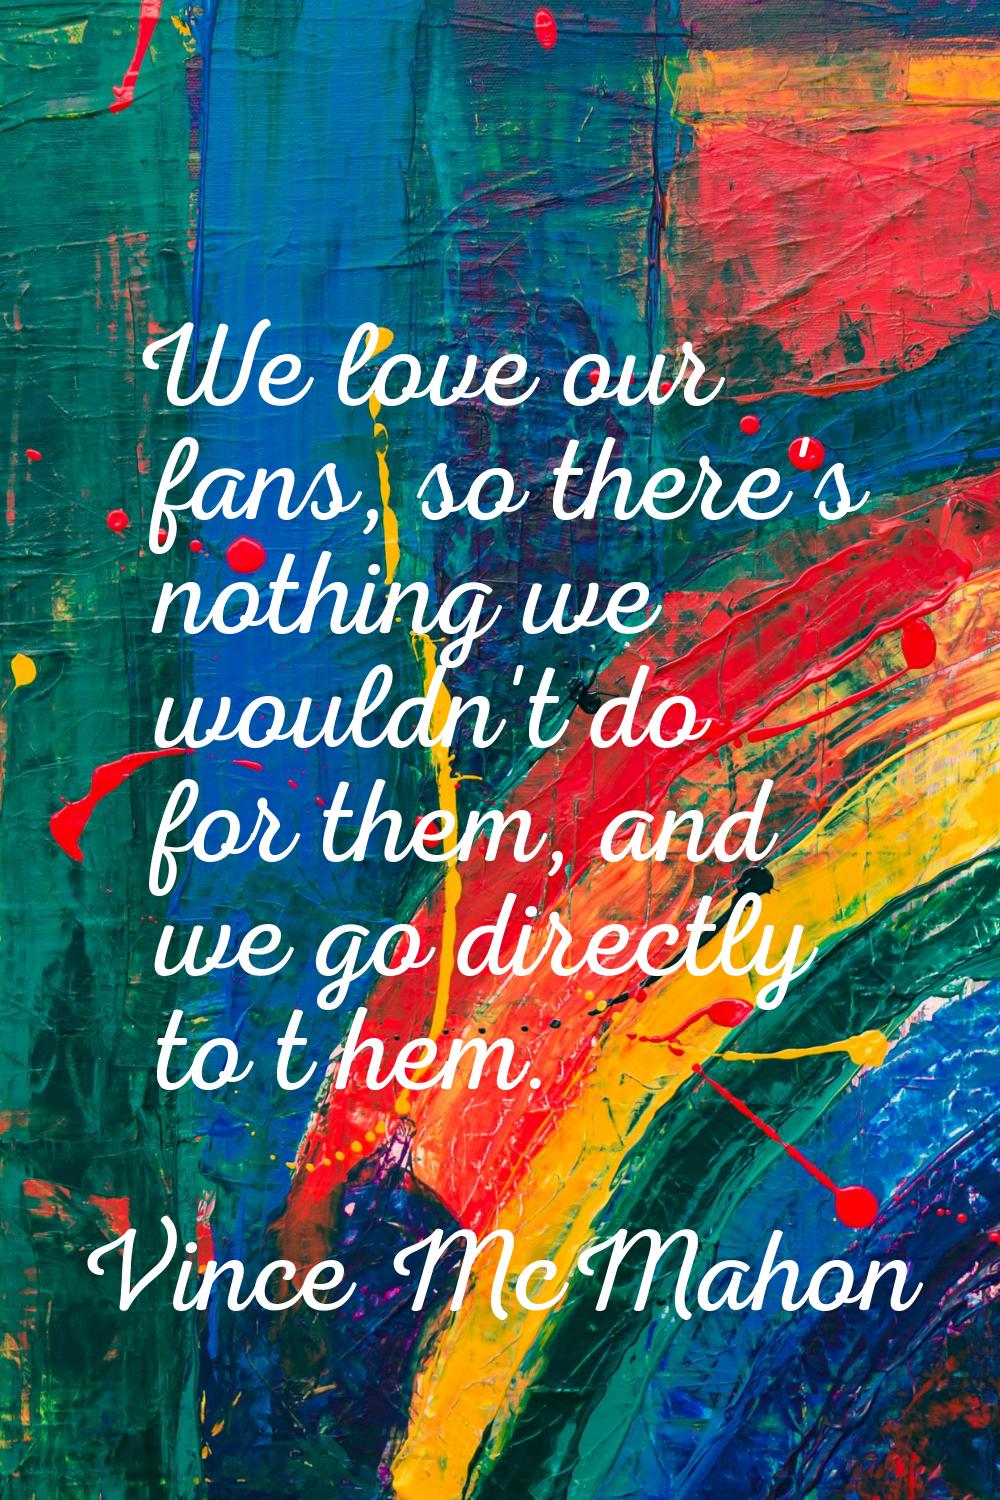 We love our fans, so there's nothing we wouldn't do for them, and we go directly to t hem.